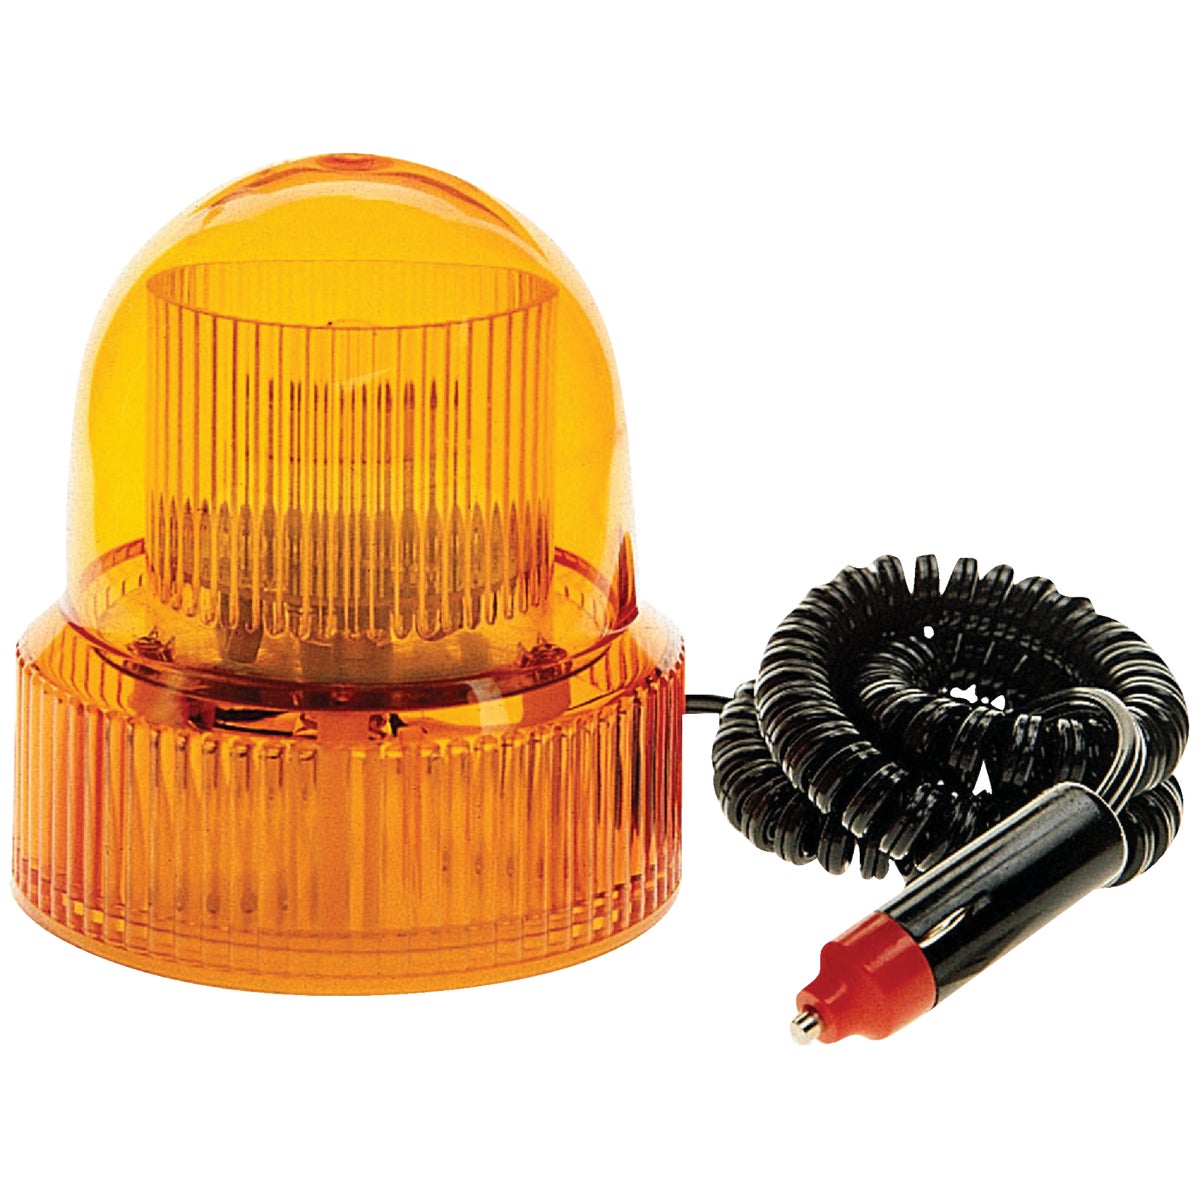 Item 573365, The Amber Beacon Revolving Light is used to warn other motorists of your 